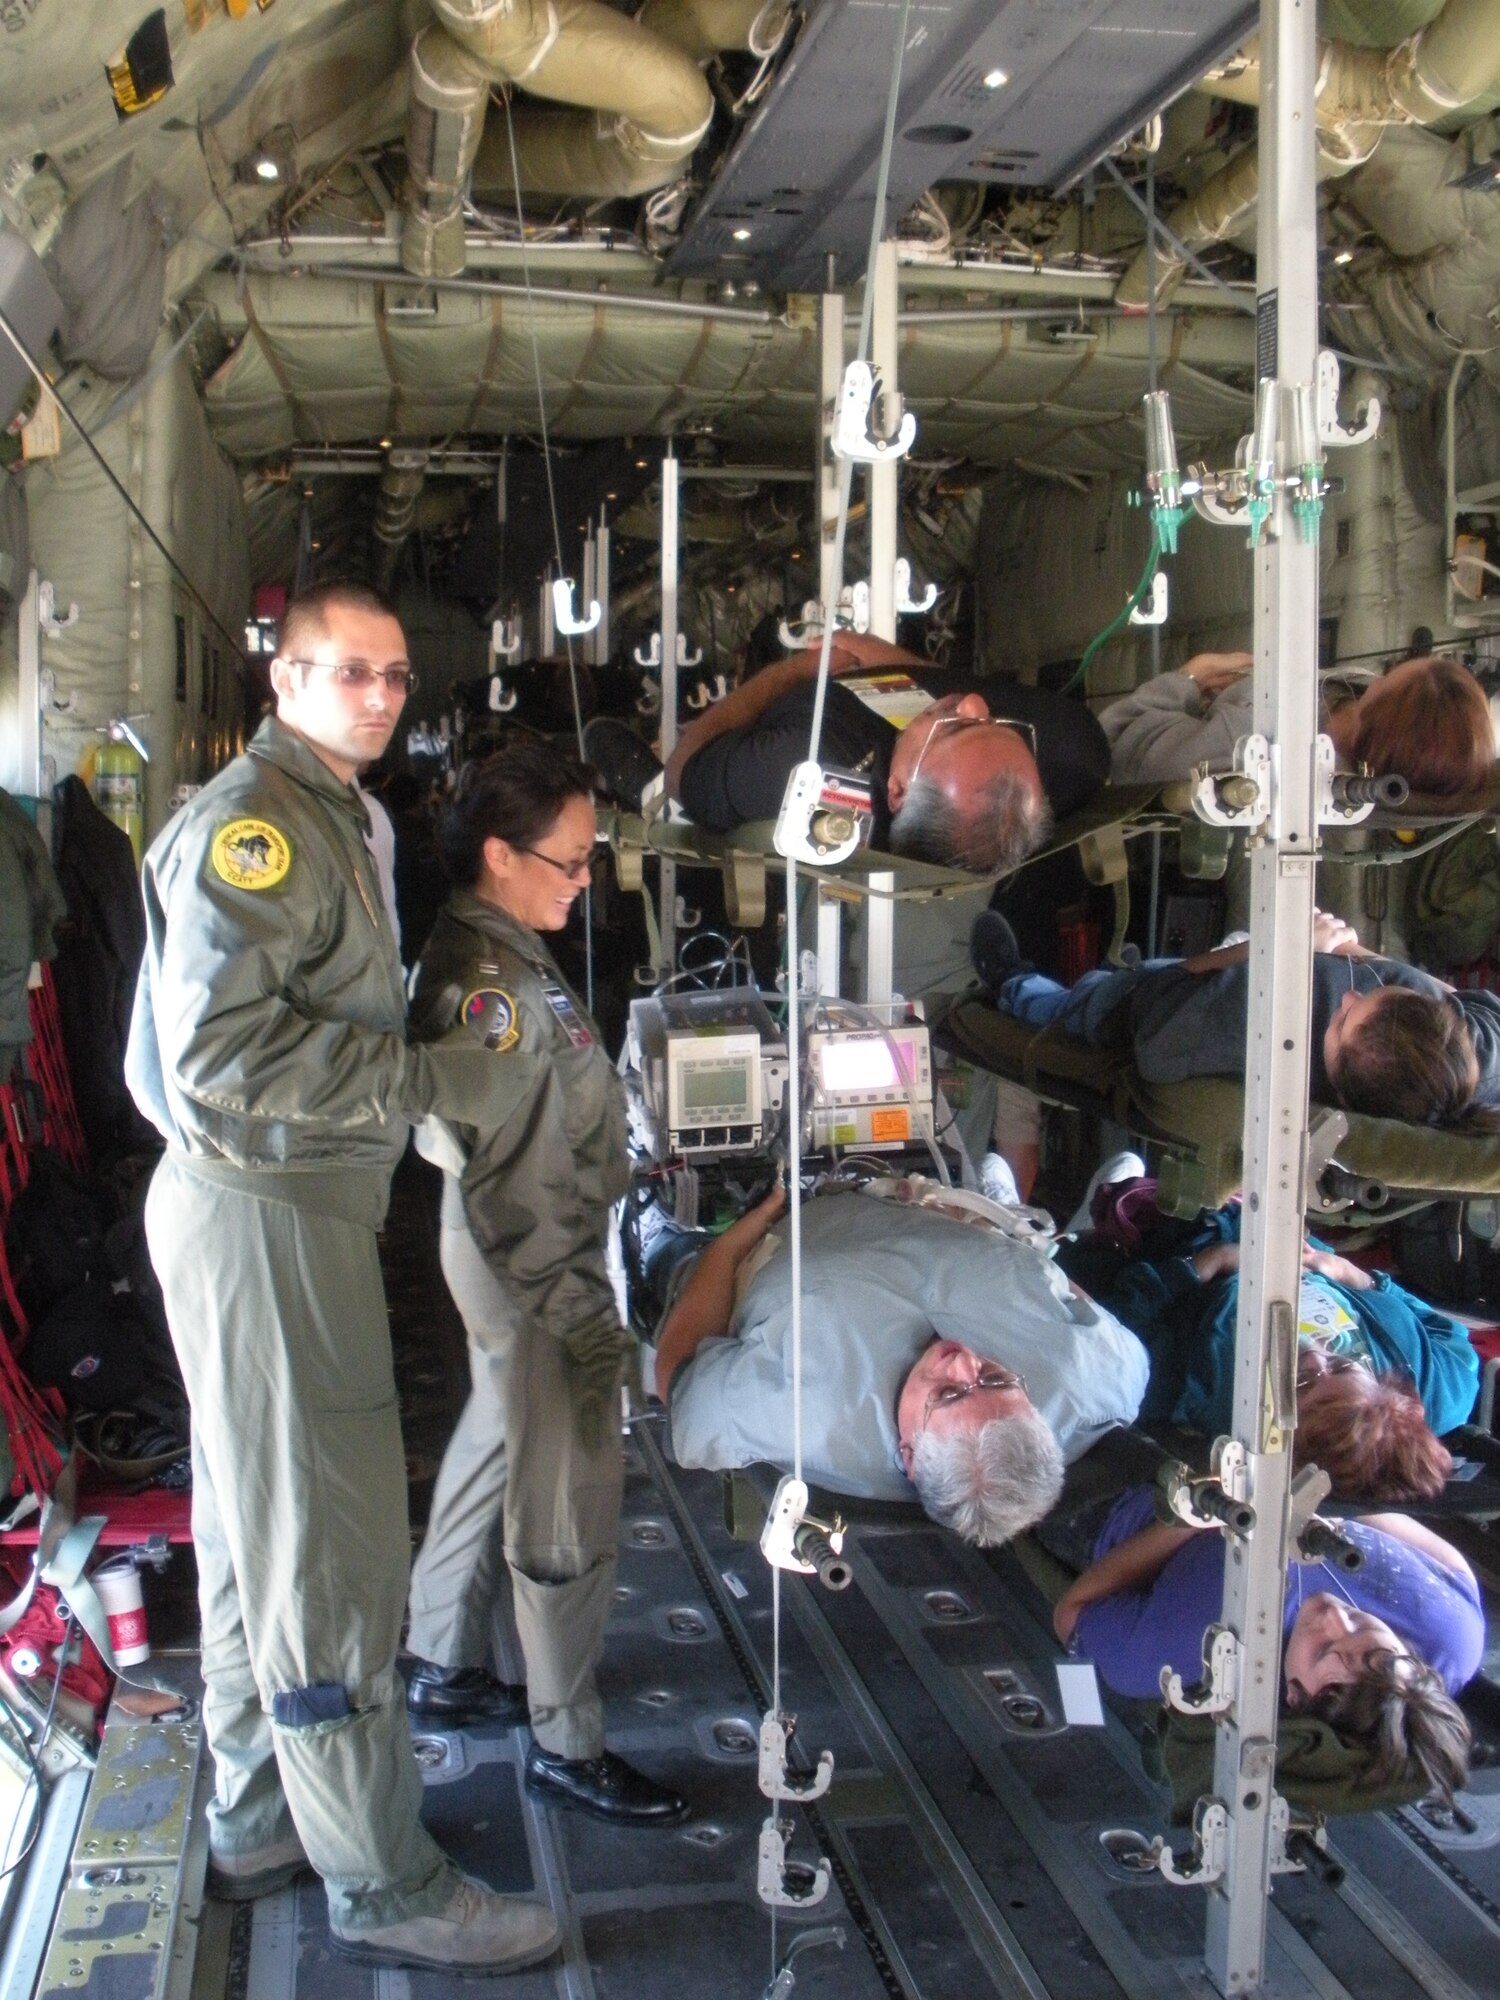 Staff Sgt. Christopher Martin and Capt. Majella Vito prepare to take a critical care patient off a C-130 during an exercise in Arizona Dec. 9. (U.S. Air Force Photo/Lt. Col. Michael Chesser)